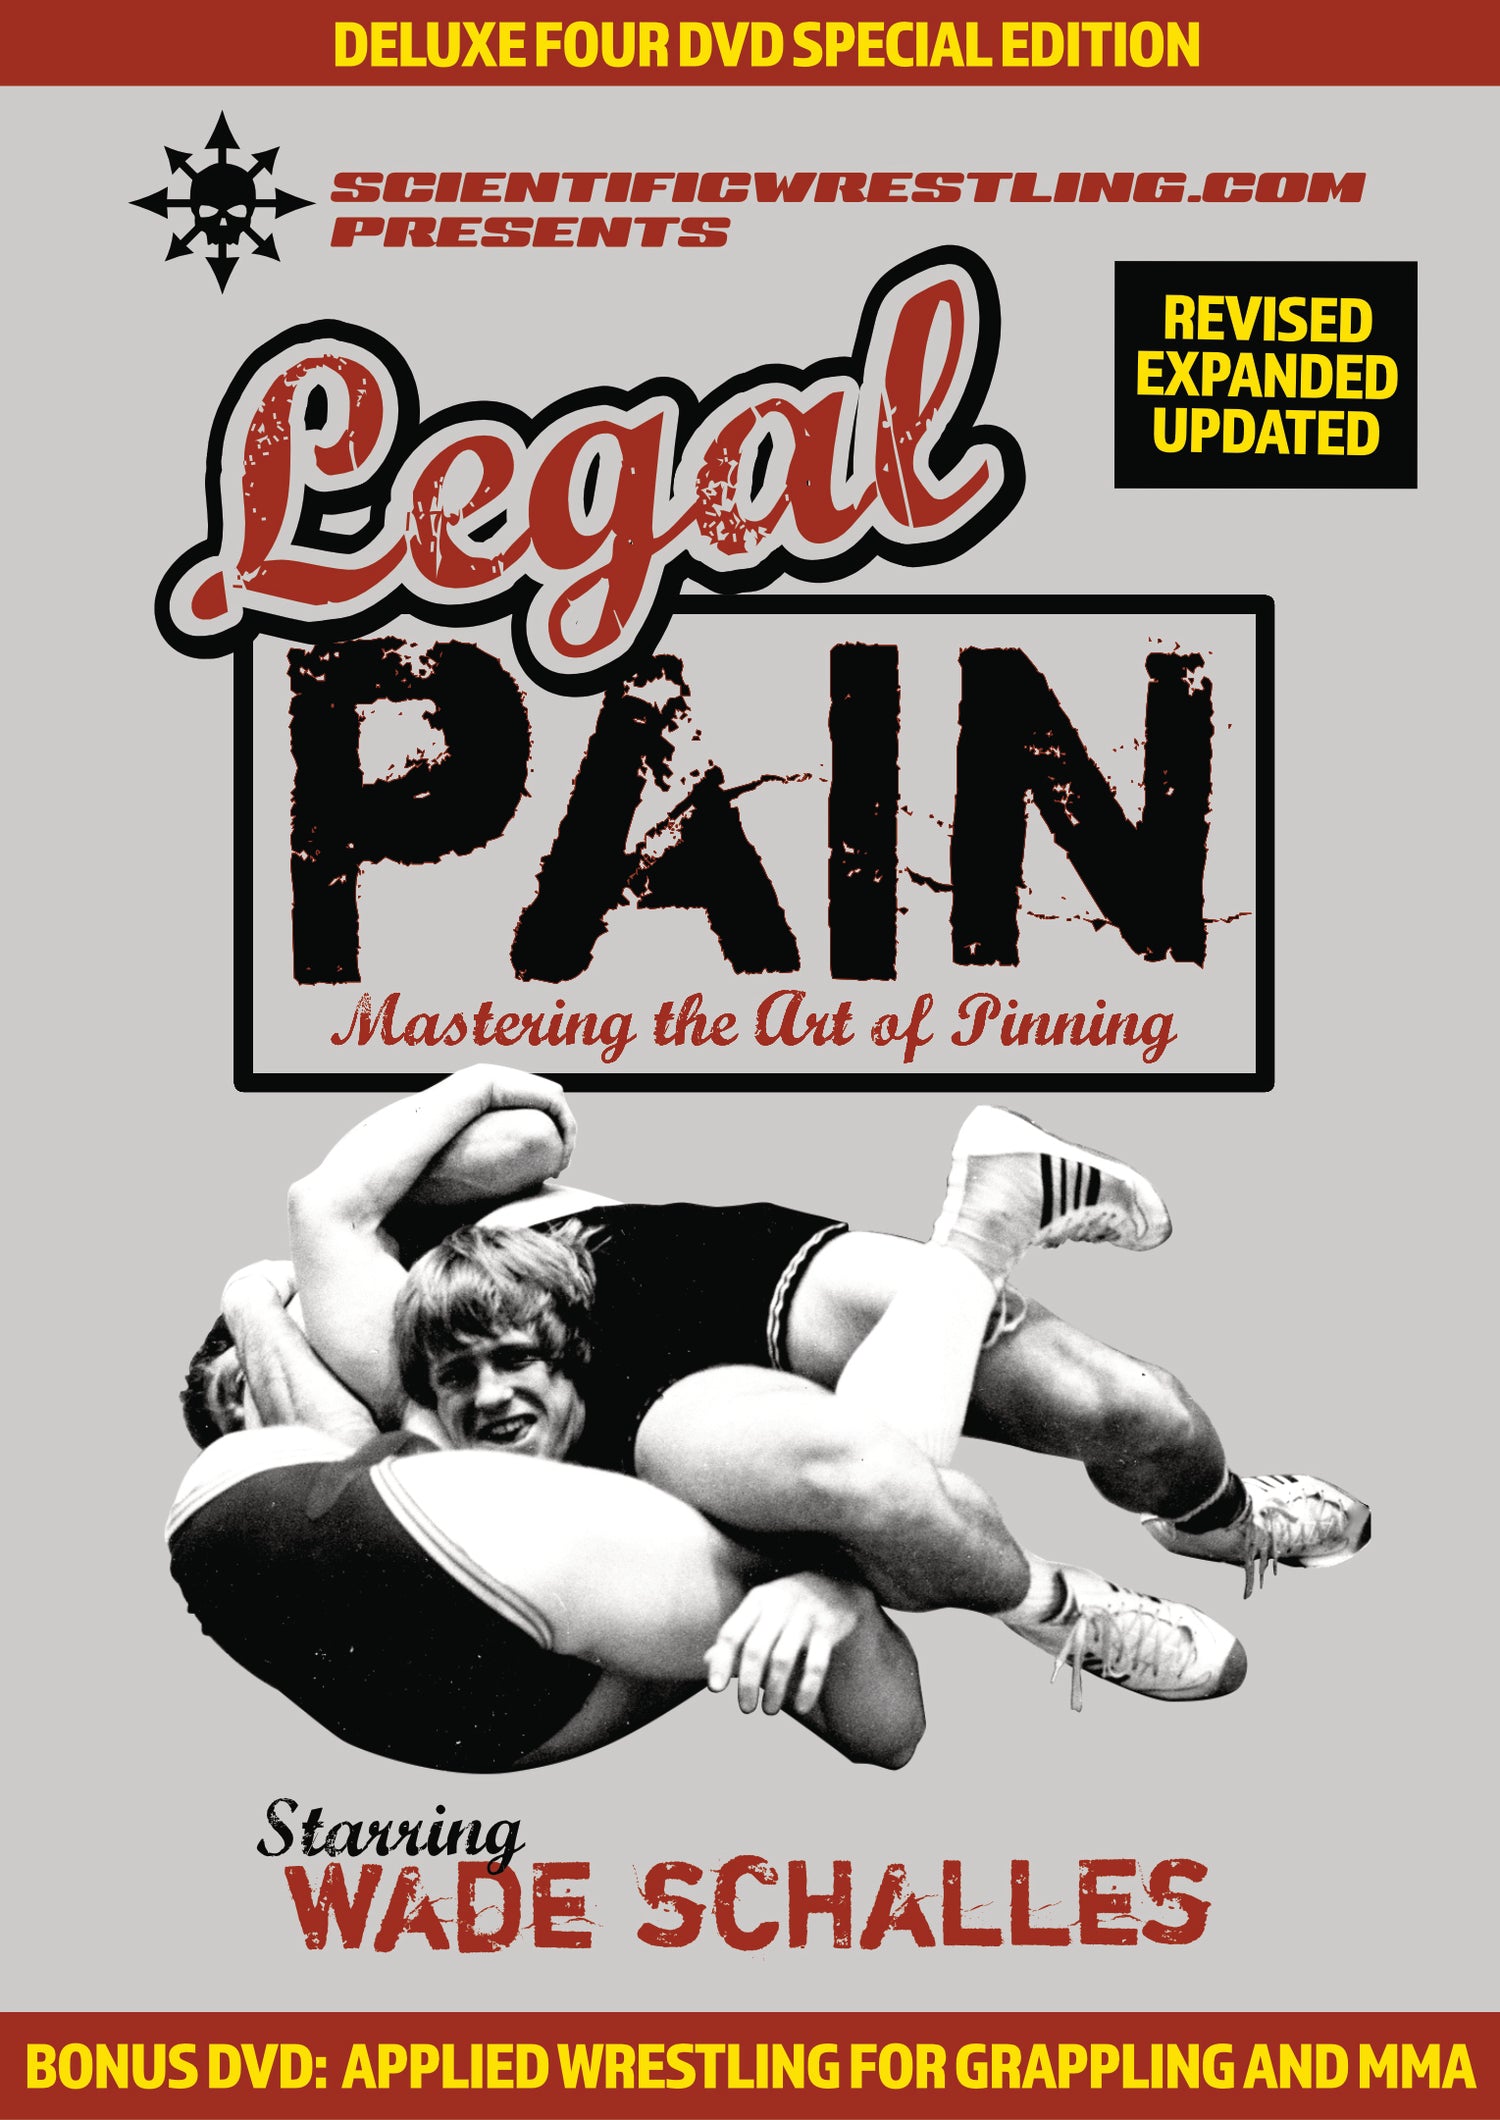 Legal Pain 4 DVD Set with Wade Schalles - Budovideos Inc